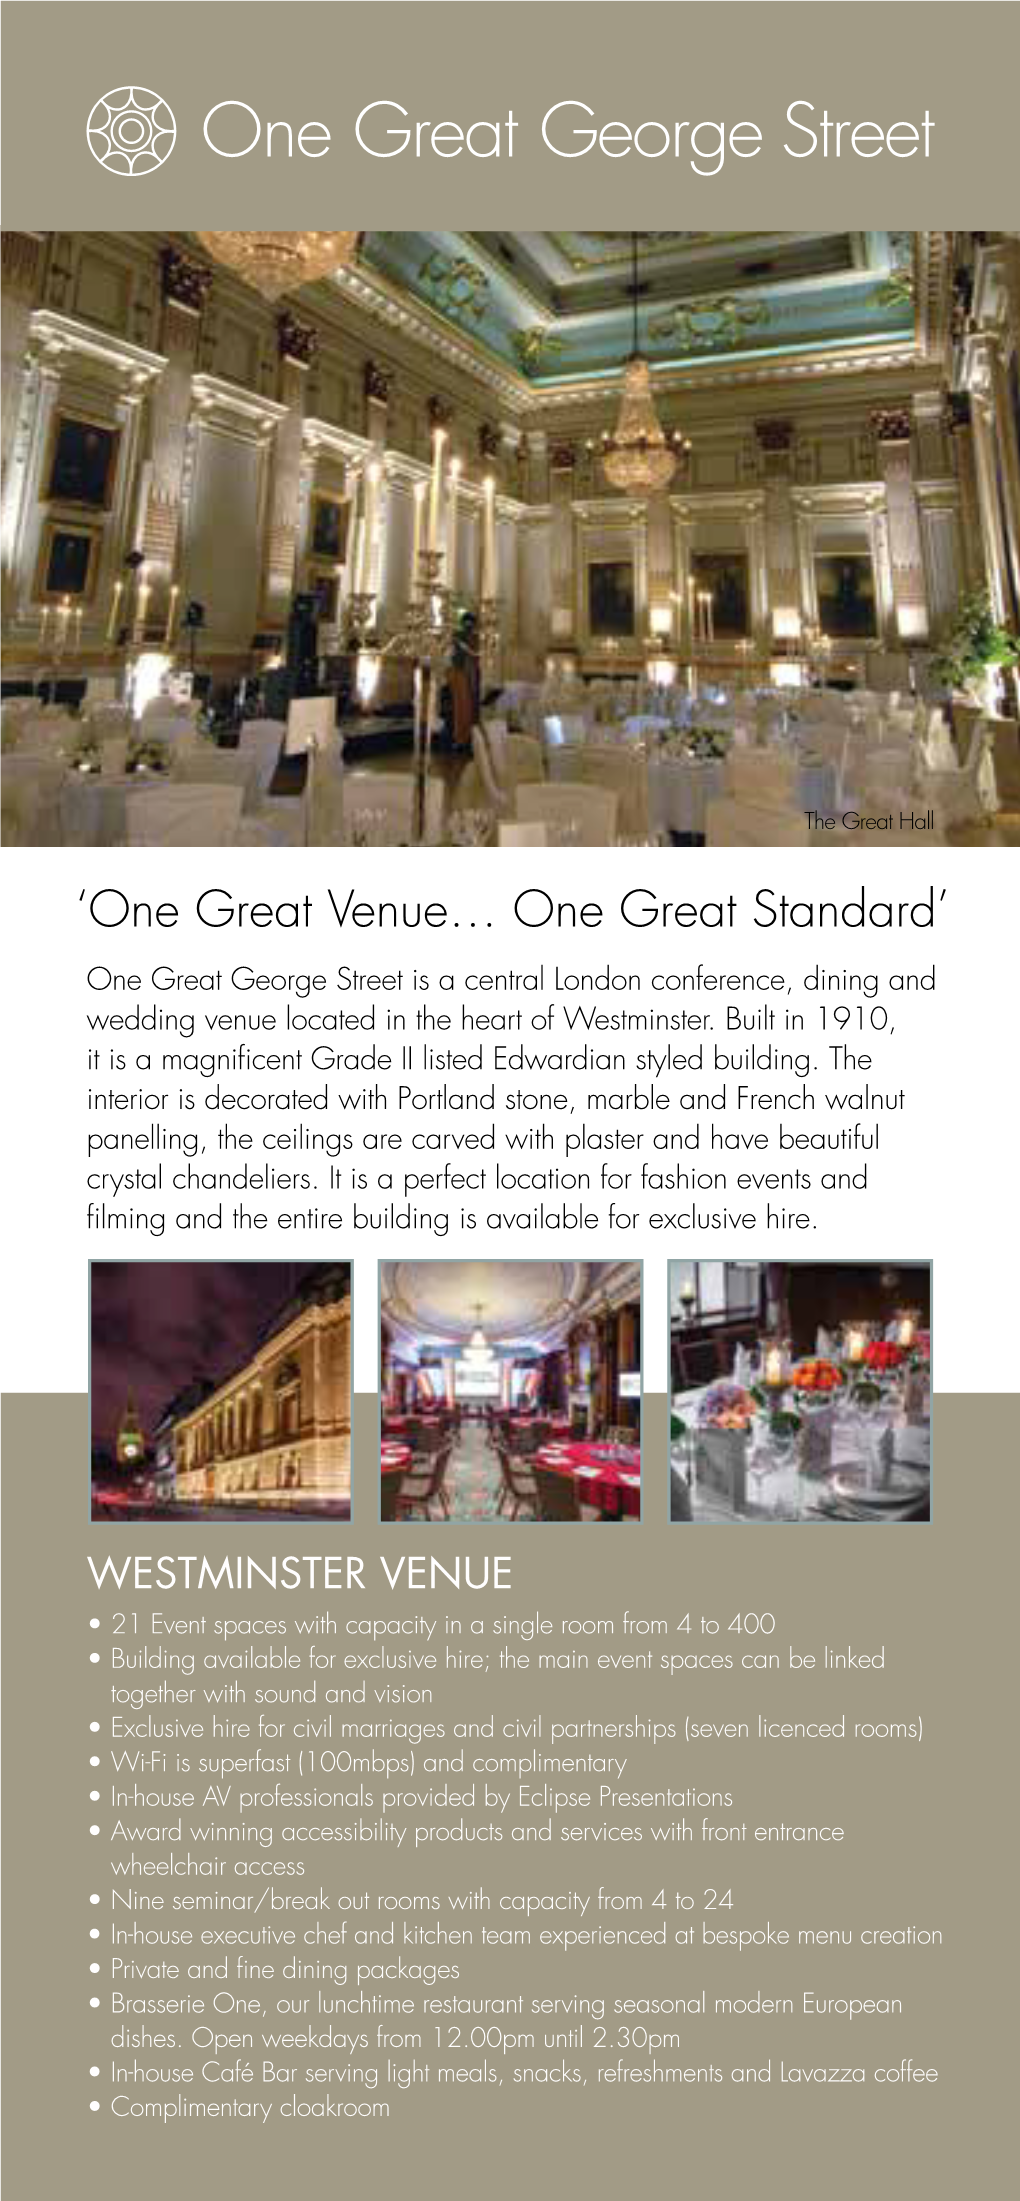 'One Great Venue… One Great Standard'